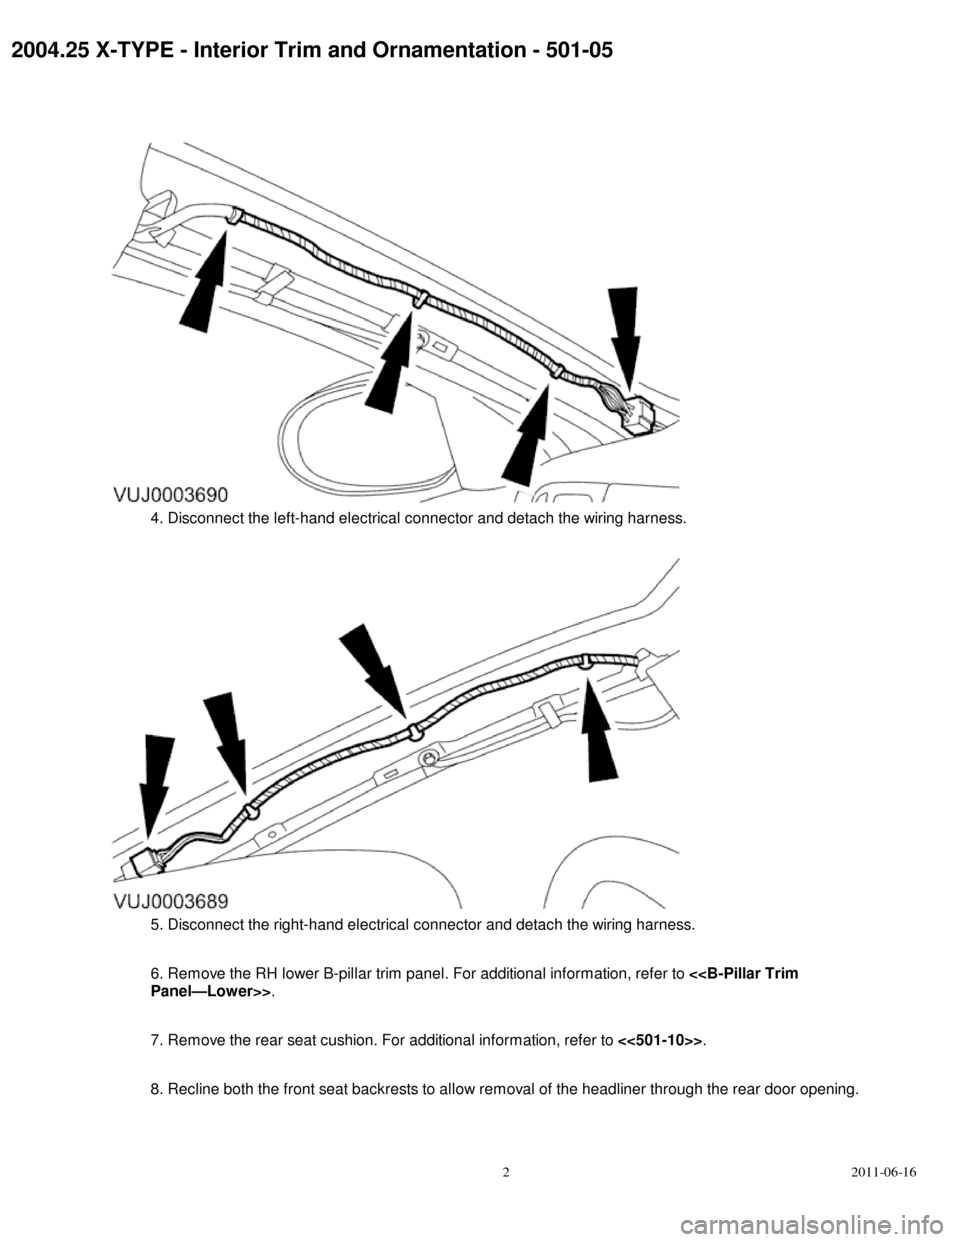 JAGUAR X TYPE 2004 1.G Headliner Manual 2004.25 X-TYPE - Interior Trim and Ornamentation - 501-05
4. Disconnect the left-hand electrical connector and detach the wiring harness.5. Disconnect the right-hand electrical connector and detach th